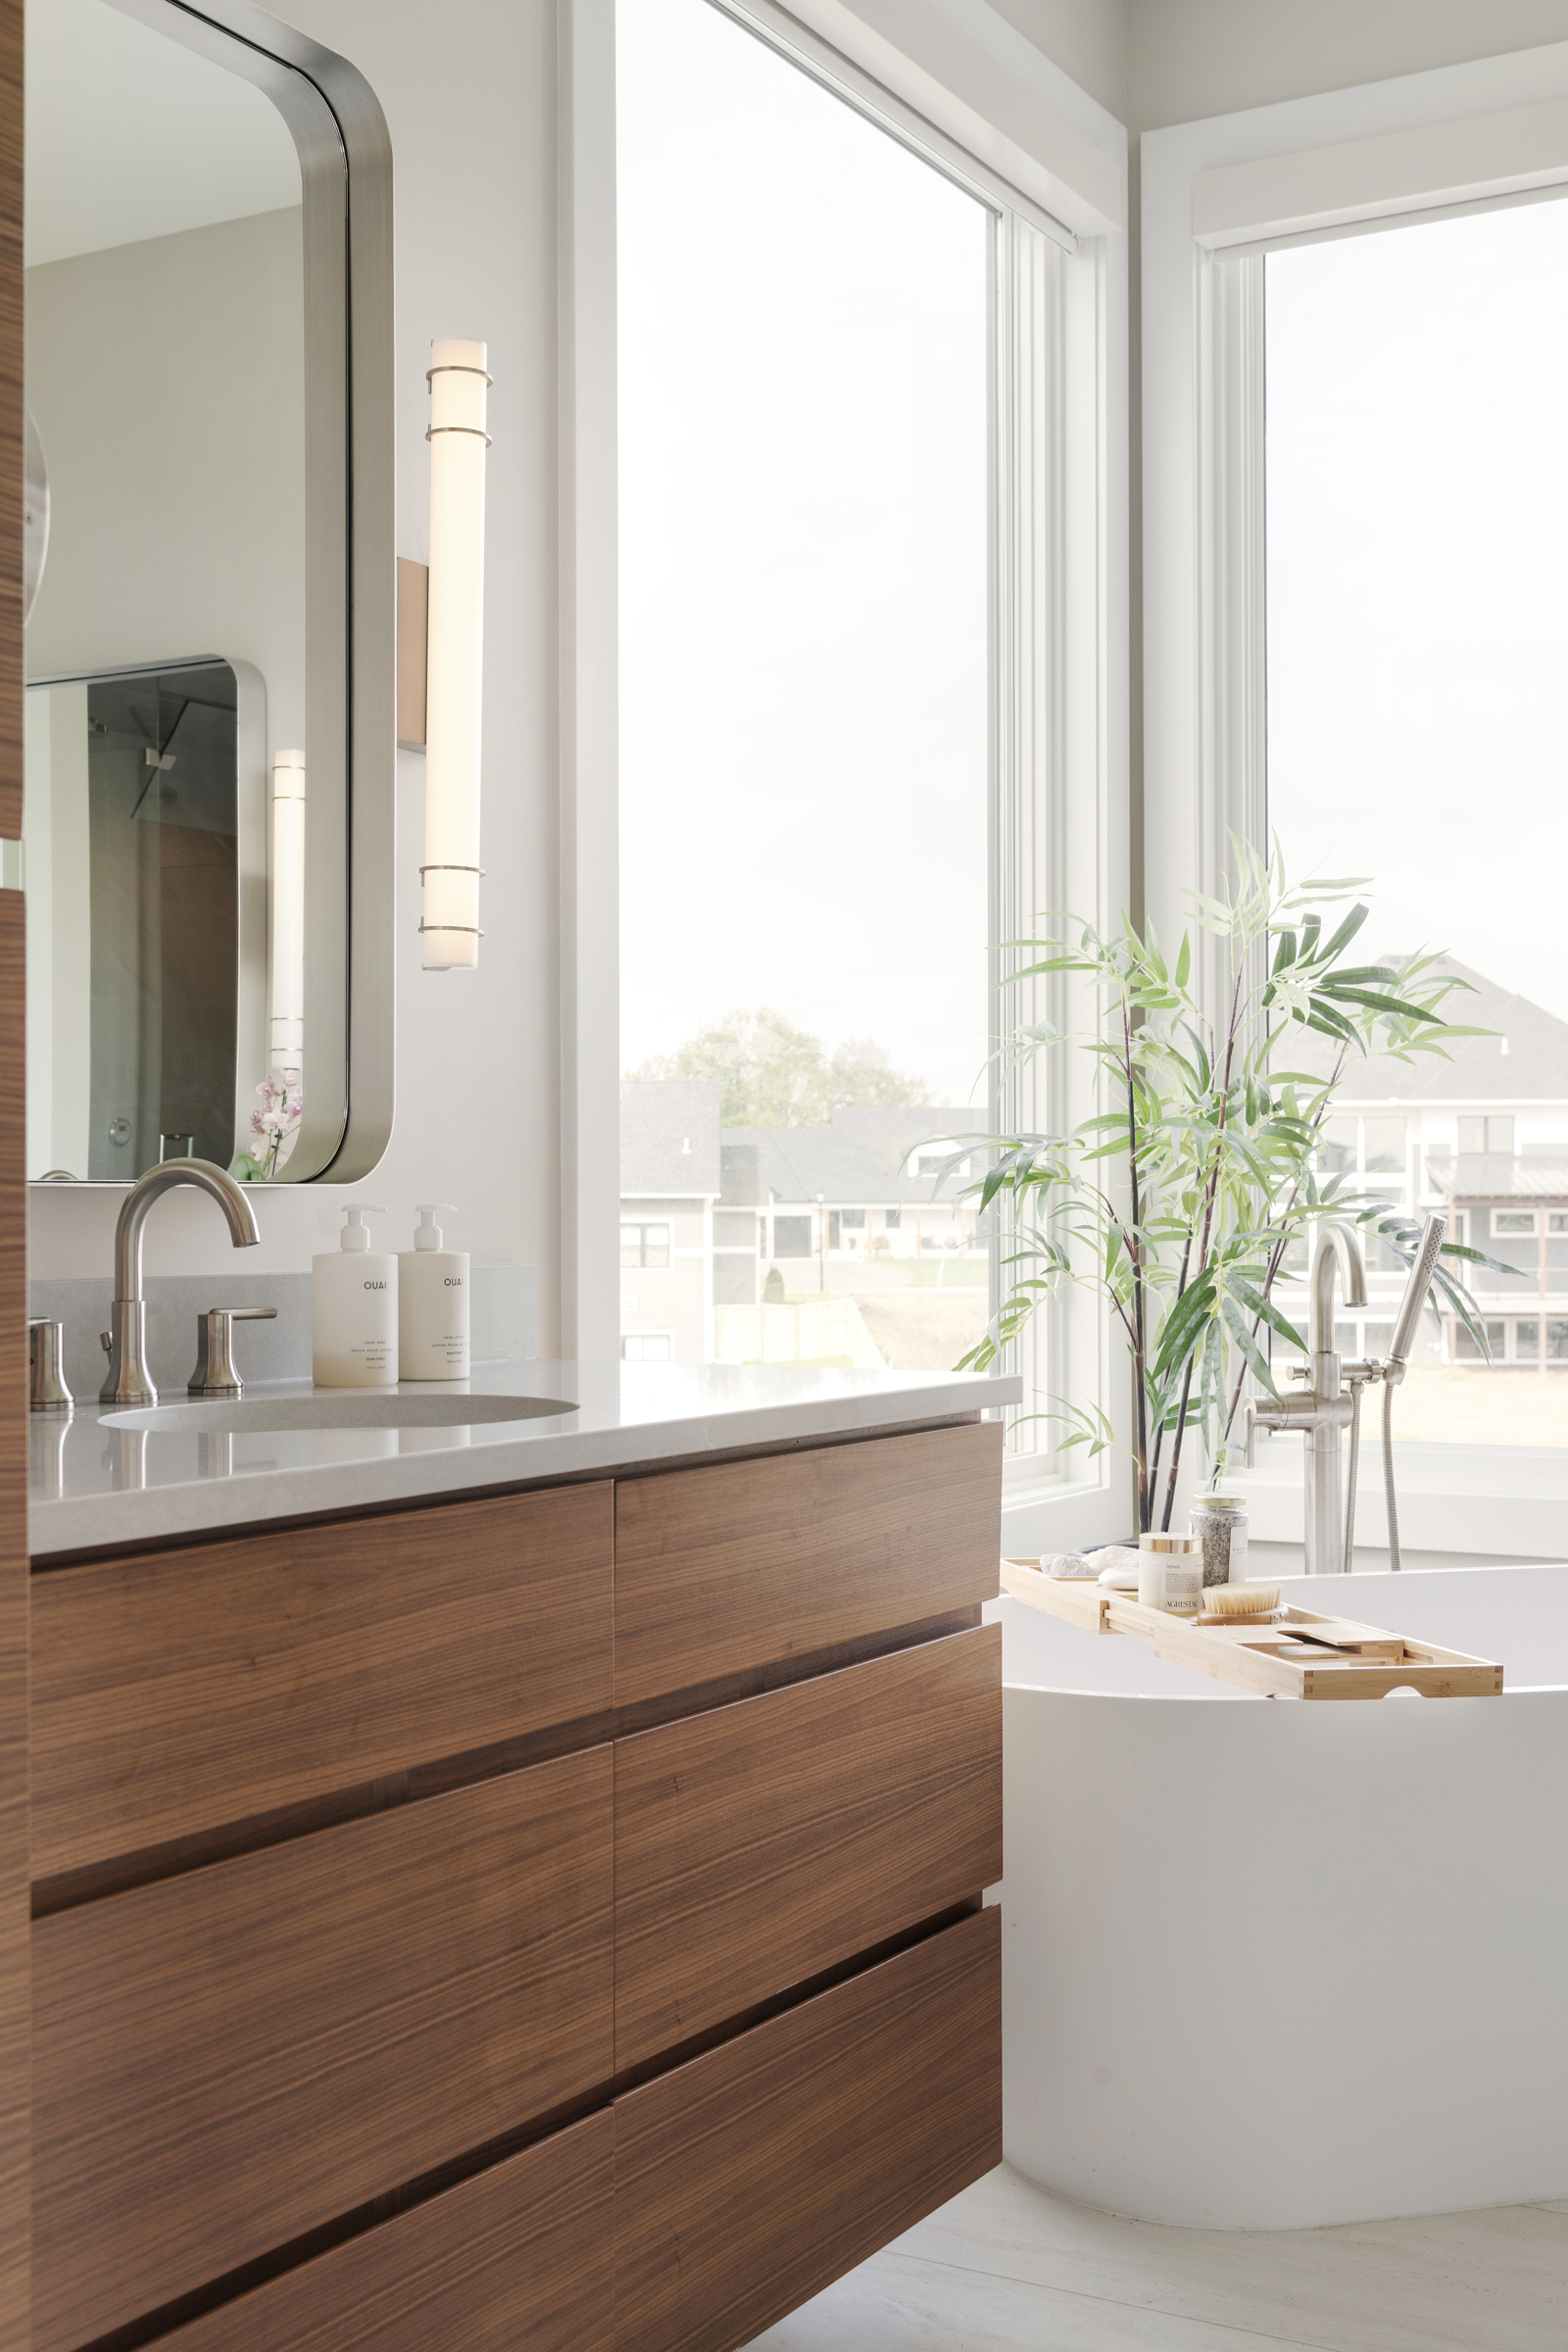 A modern bathroom with wooden cabinets and a large window.